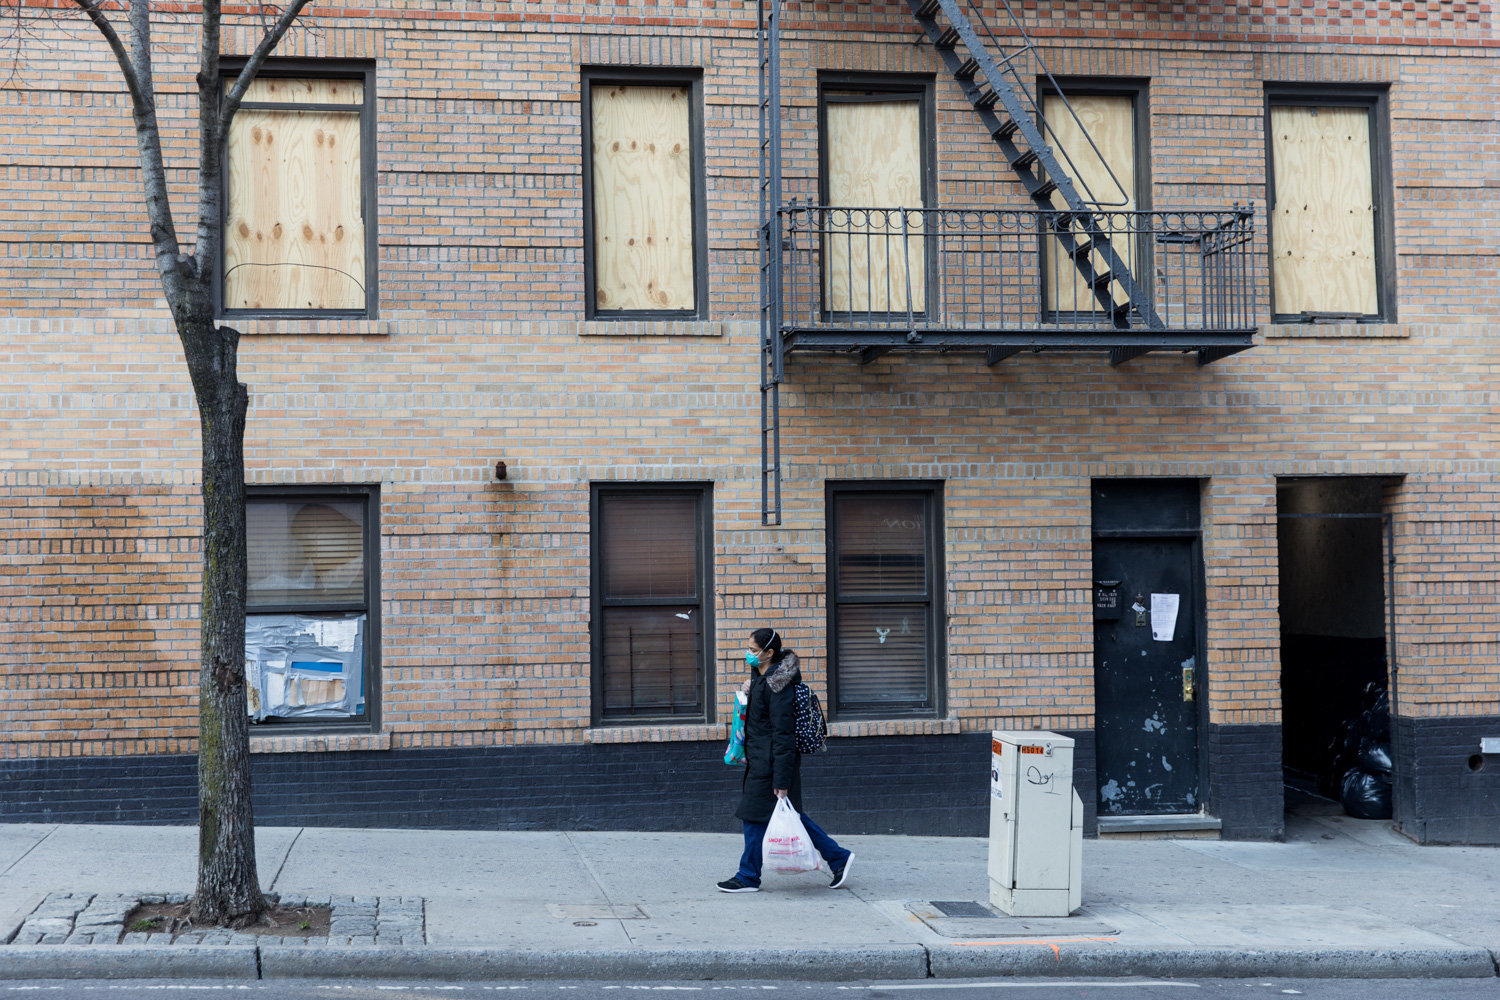 Windows are boarded up at 215 W. 242nd St., where a one-alarm fire injured 11 people March 6. Many were saved thanks to the efforts of Josh Pizarro, who knocked on as many doors as he could to warn his neighbors of the blaze.